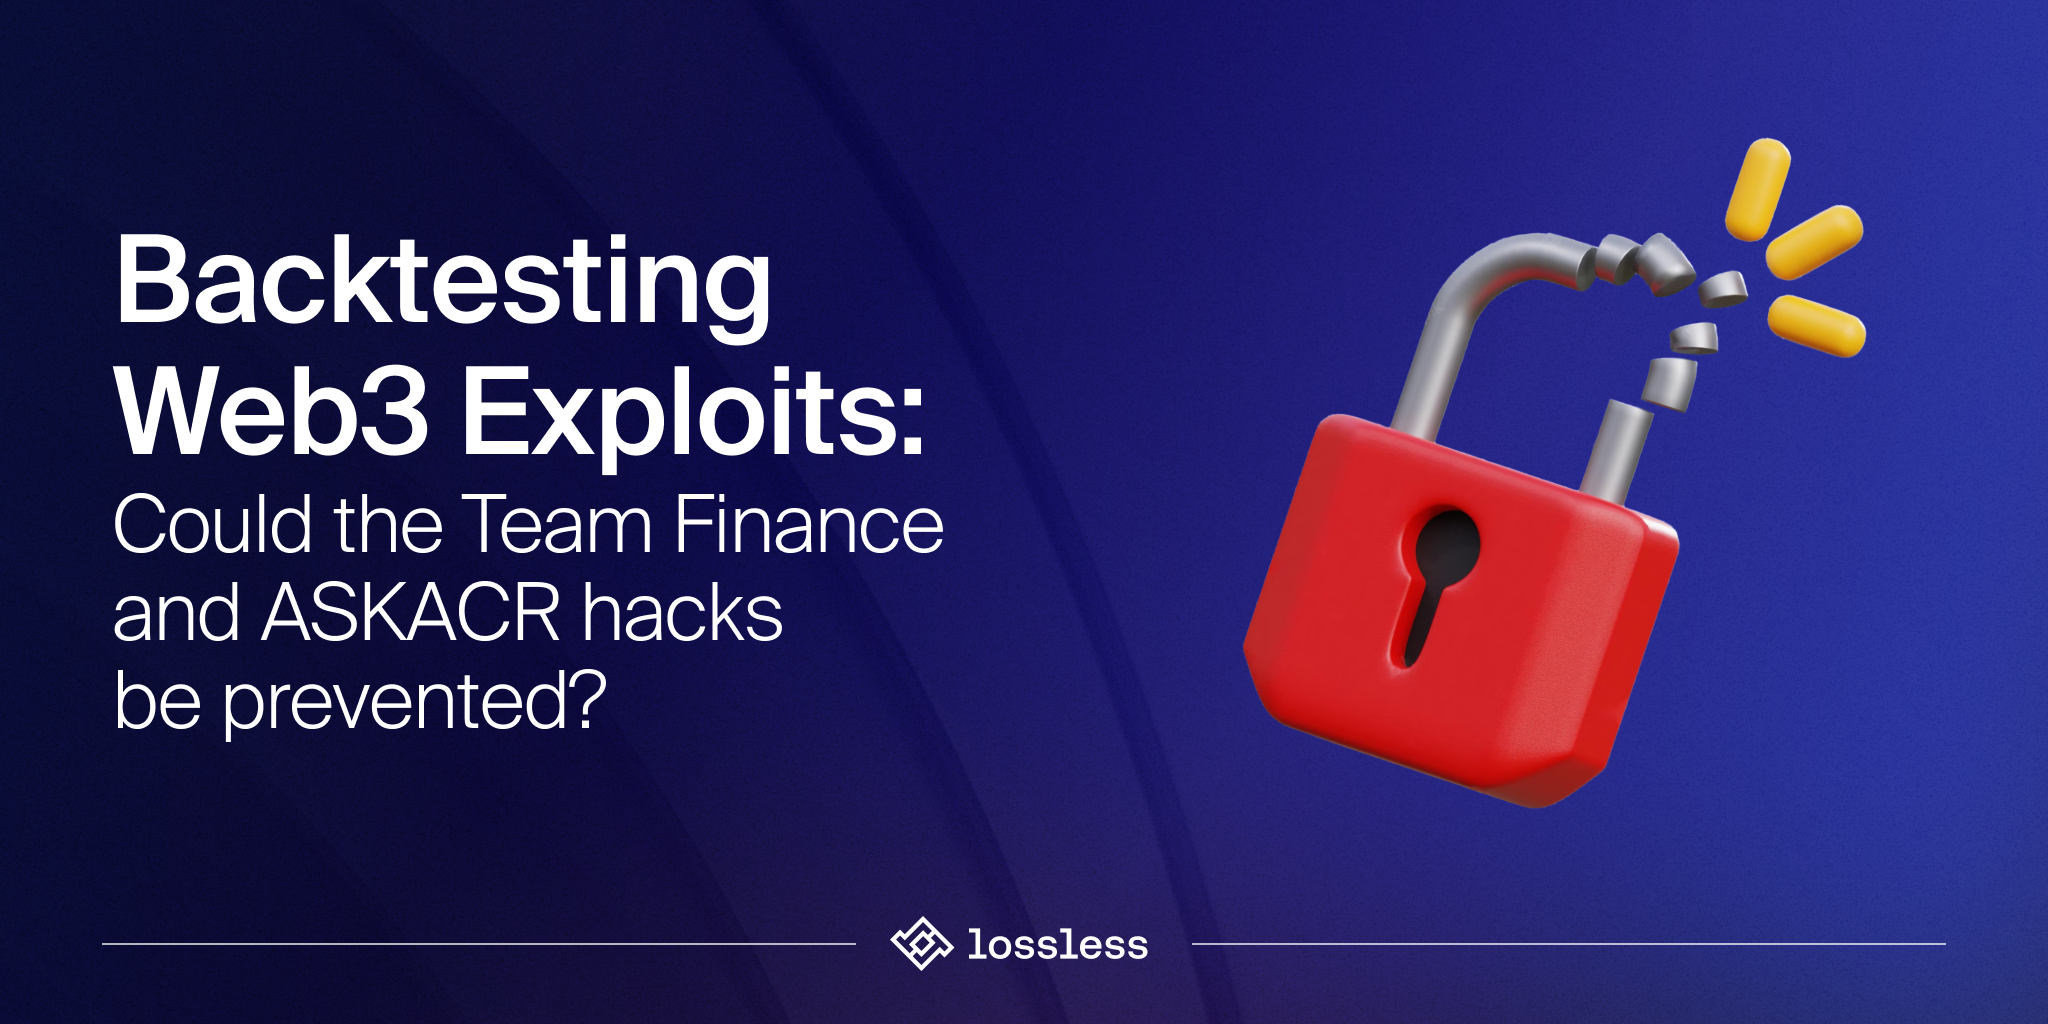 Backtesting Web3 Exploits: Could the Team Finance and ASKACR hacks be prevented?